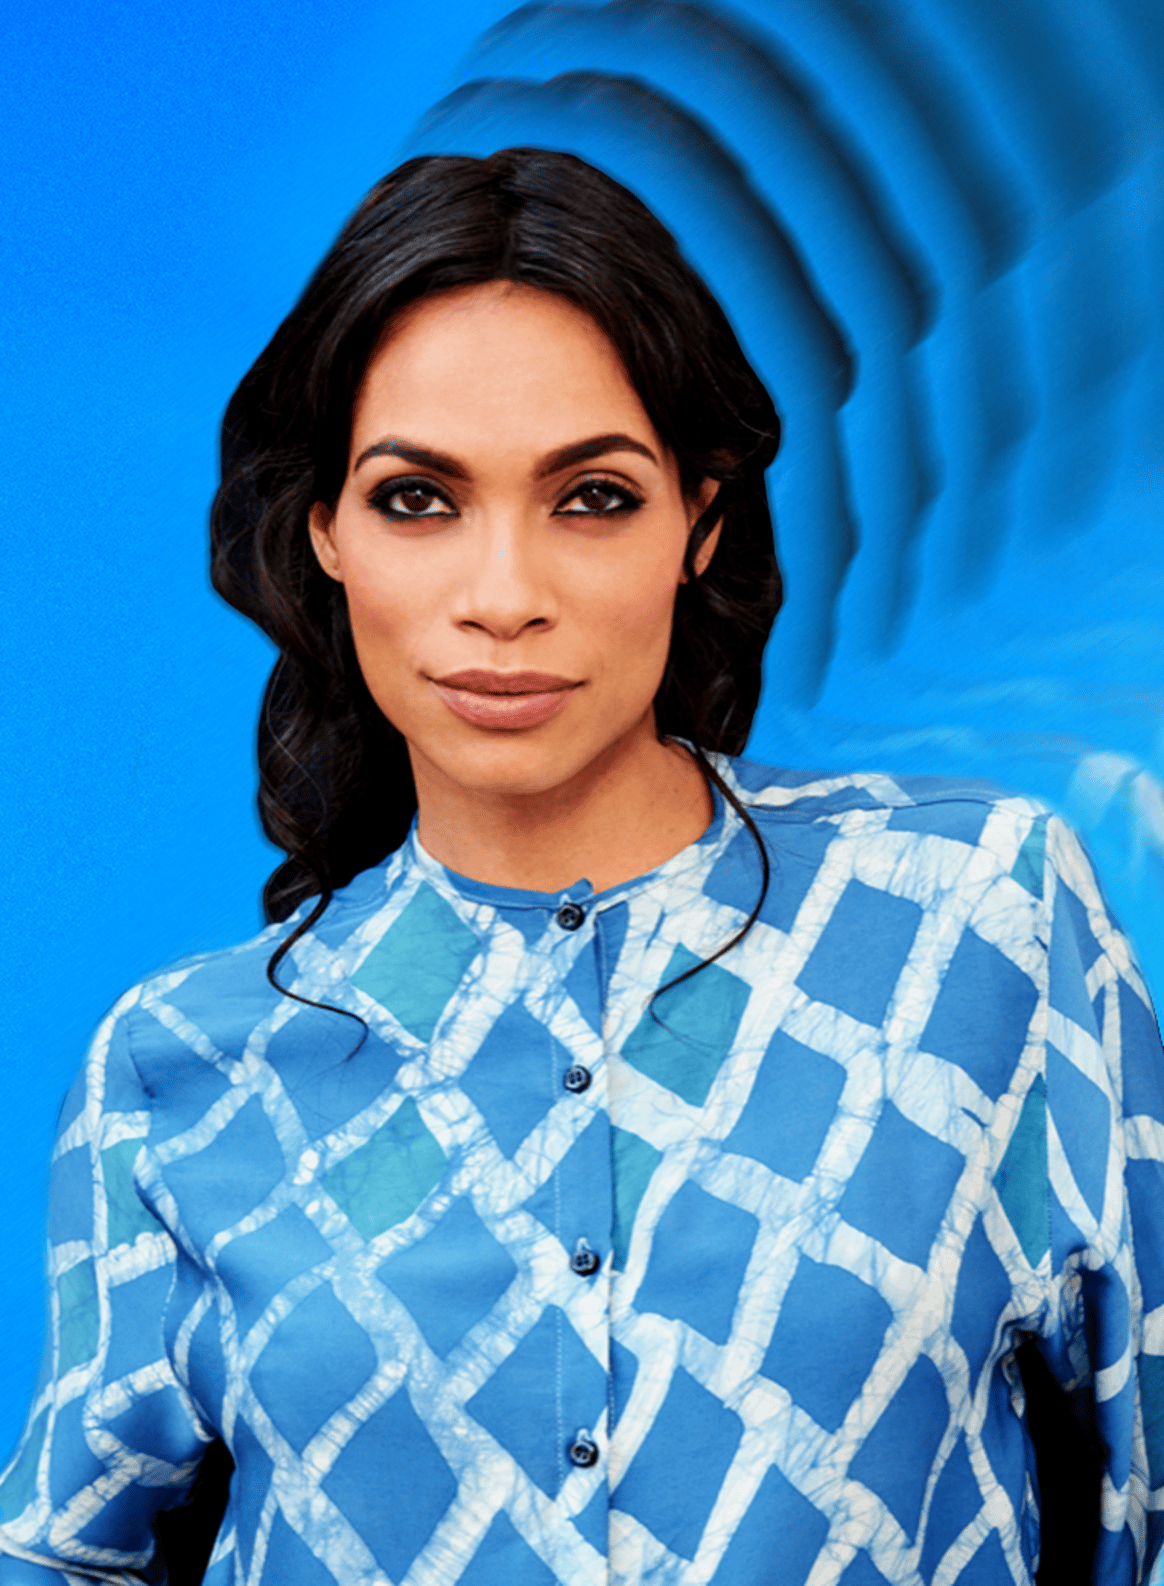 Actress Rosario Dawson joins NBA champion Dwayne Wade and others to mentor Black and Latino businesses